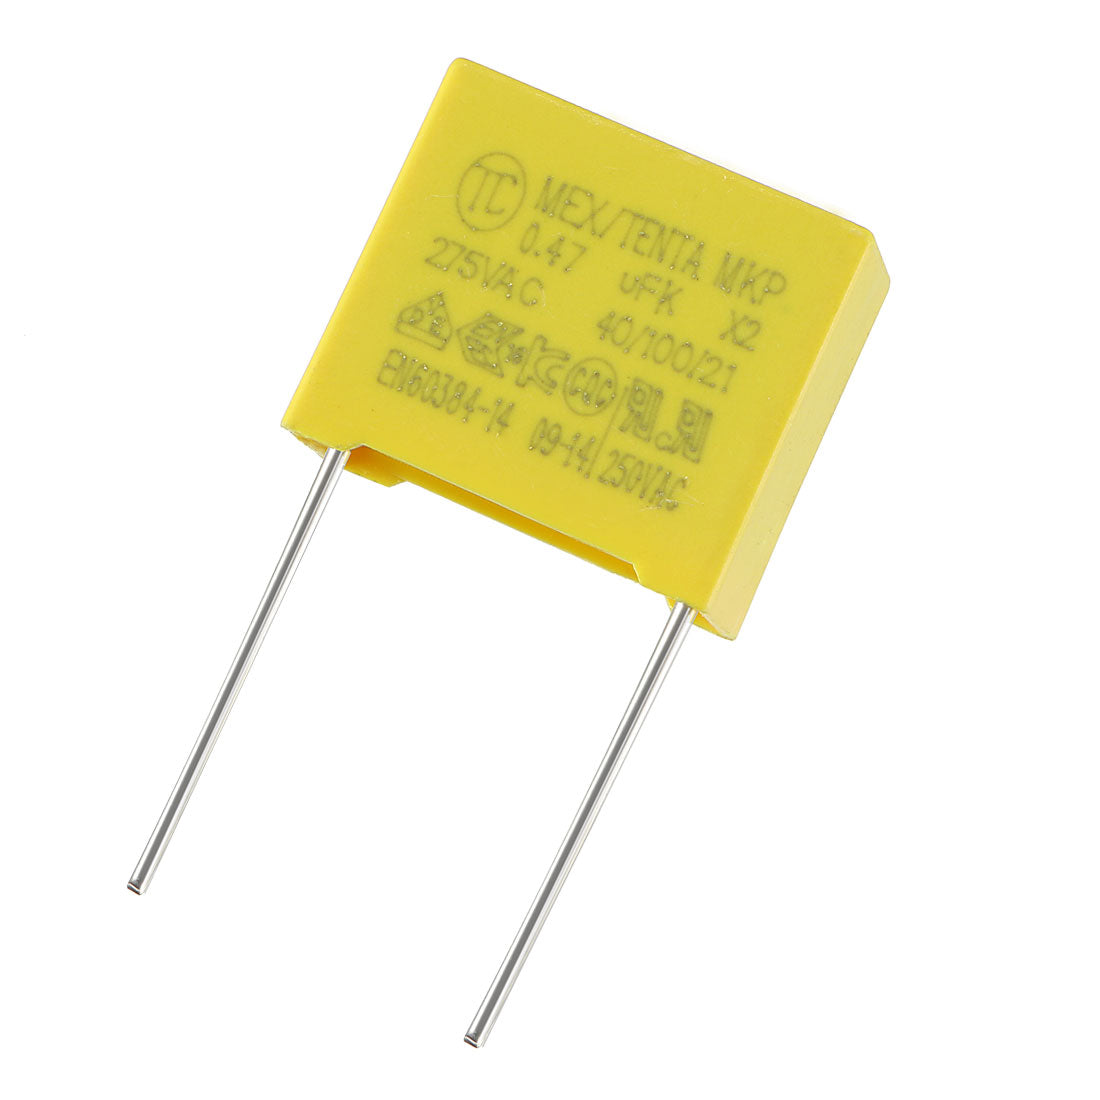 uxcell Uxcell Safety Capacitors Polypropylene Film 0.47uF 275VAC X2 MKP 5 Pcs